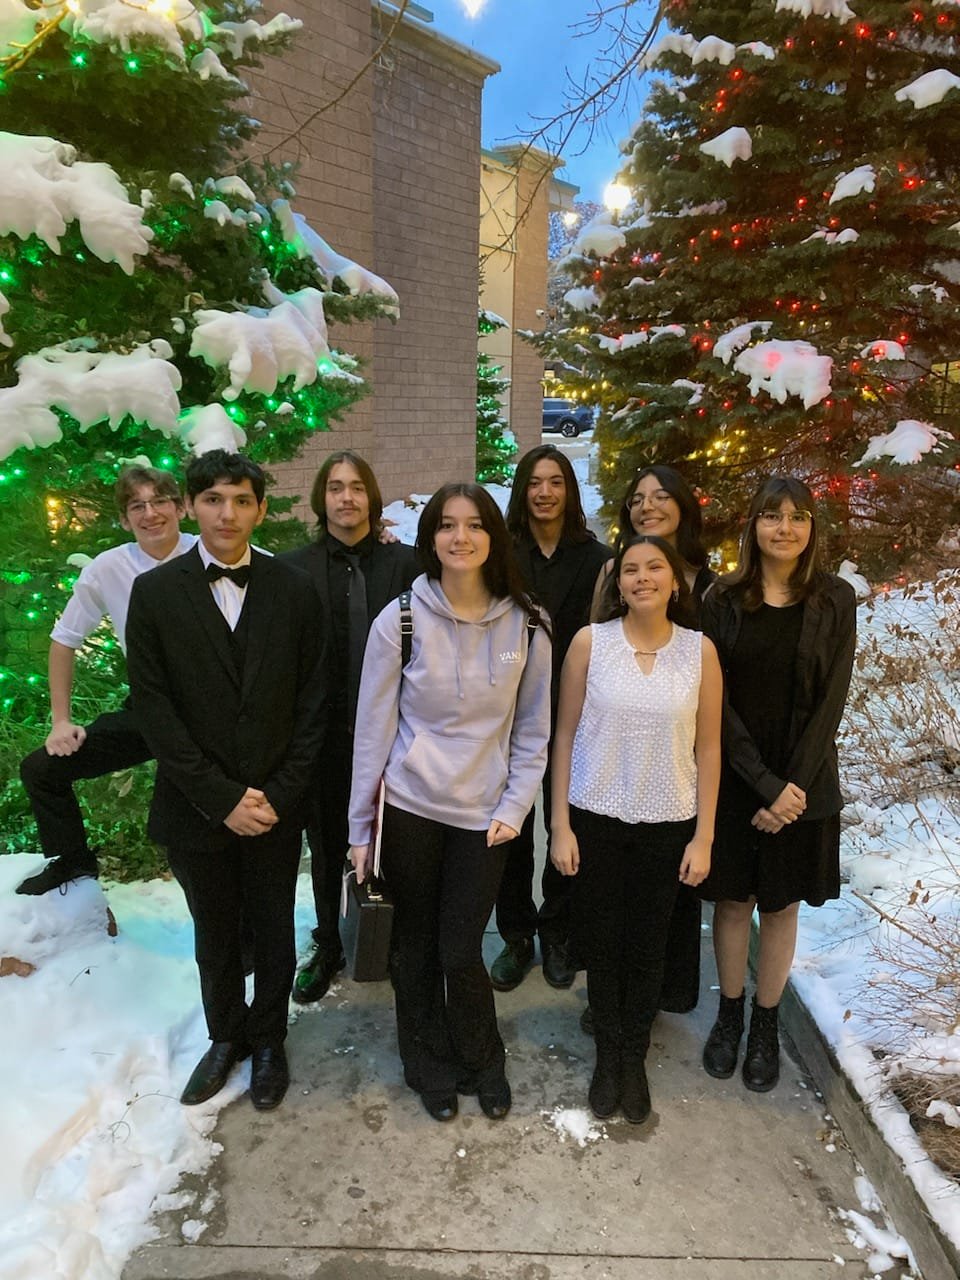 Show Low HS students selected for Southern Utah University Honor Band Festival this weekend